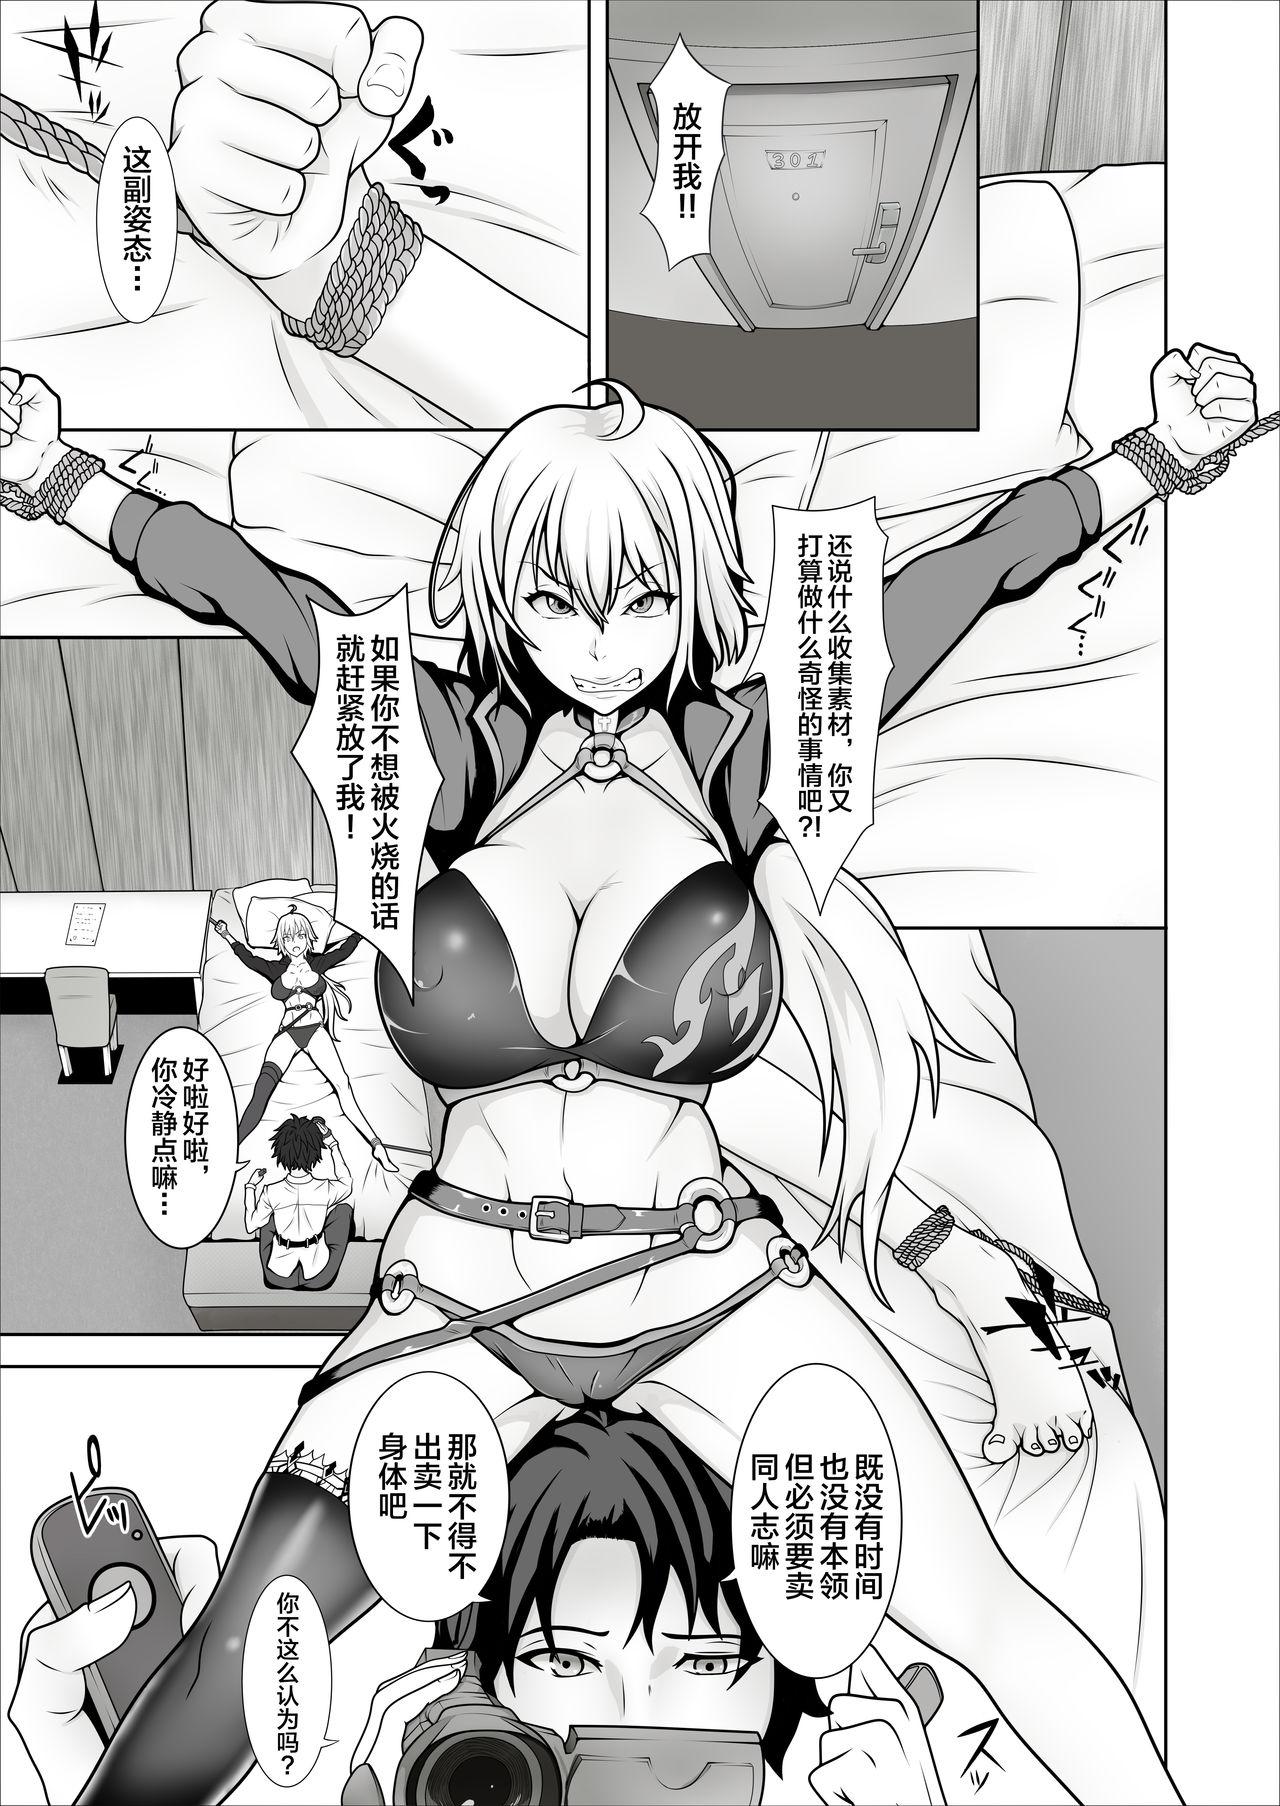 Married 俺のジャンヌは性処理係 - Fate grand order Sex Toys - Page 11